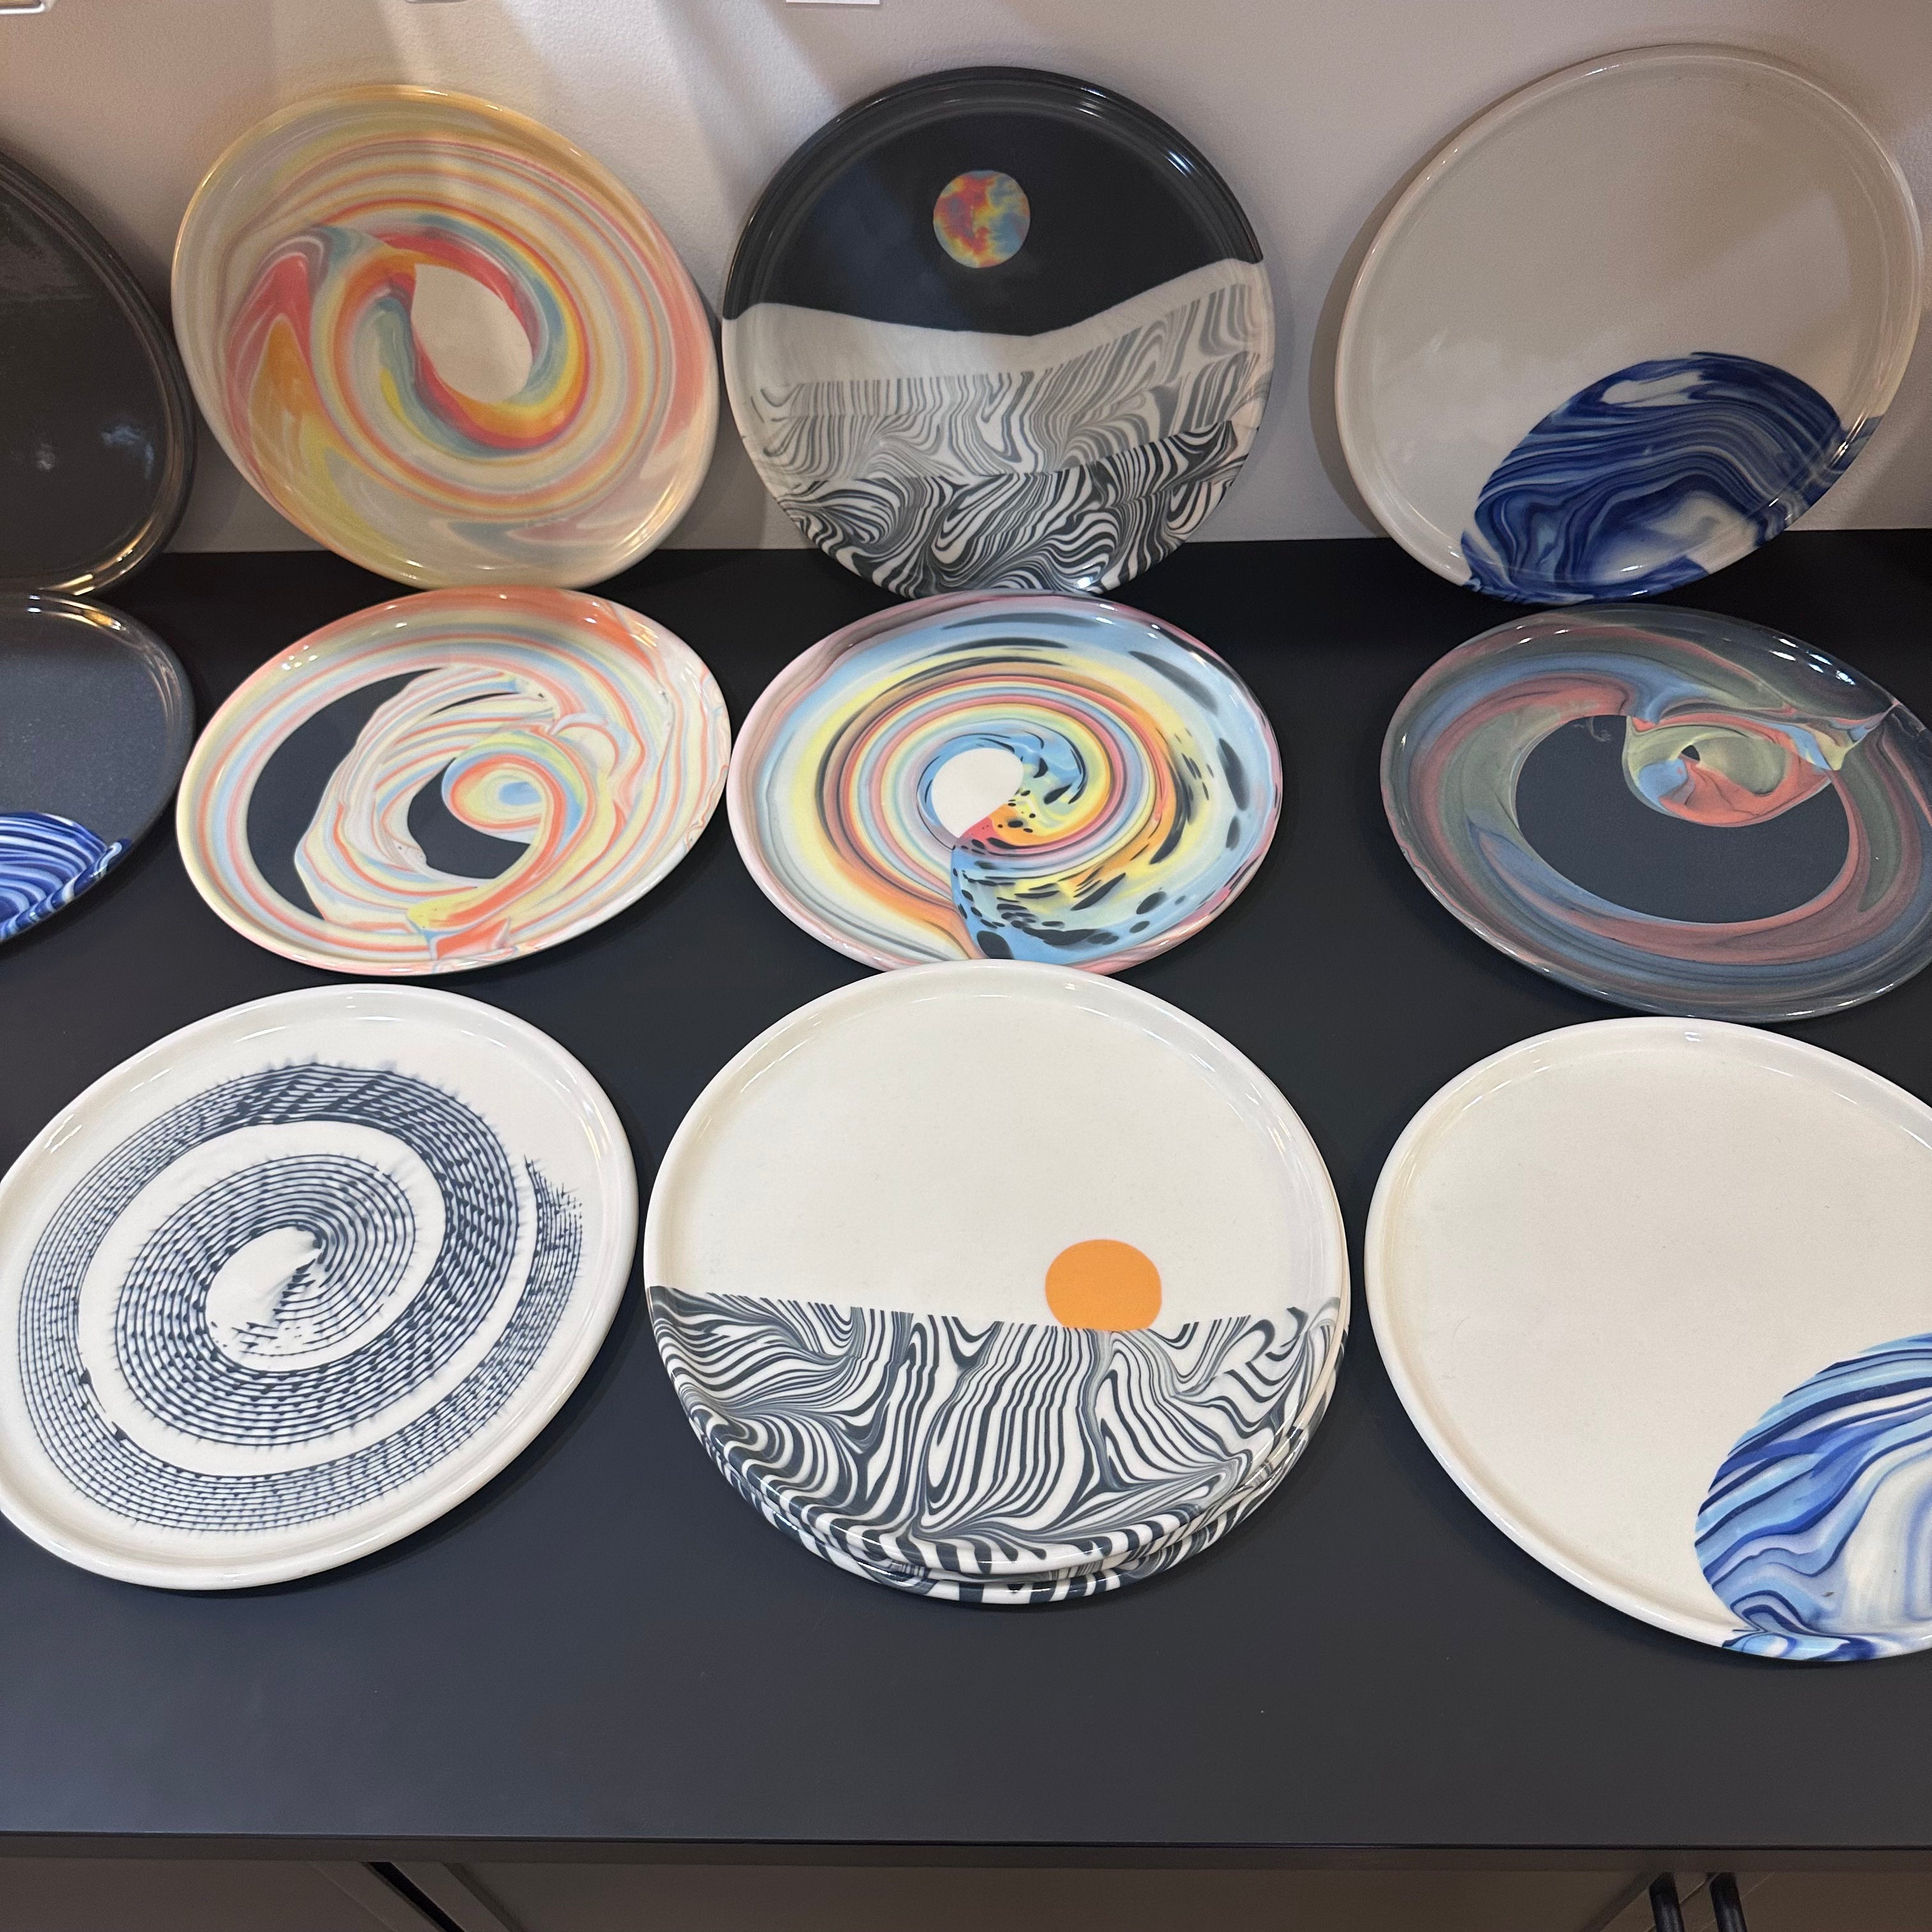 One-off plates